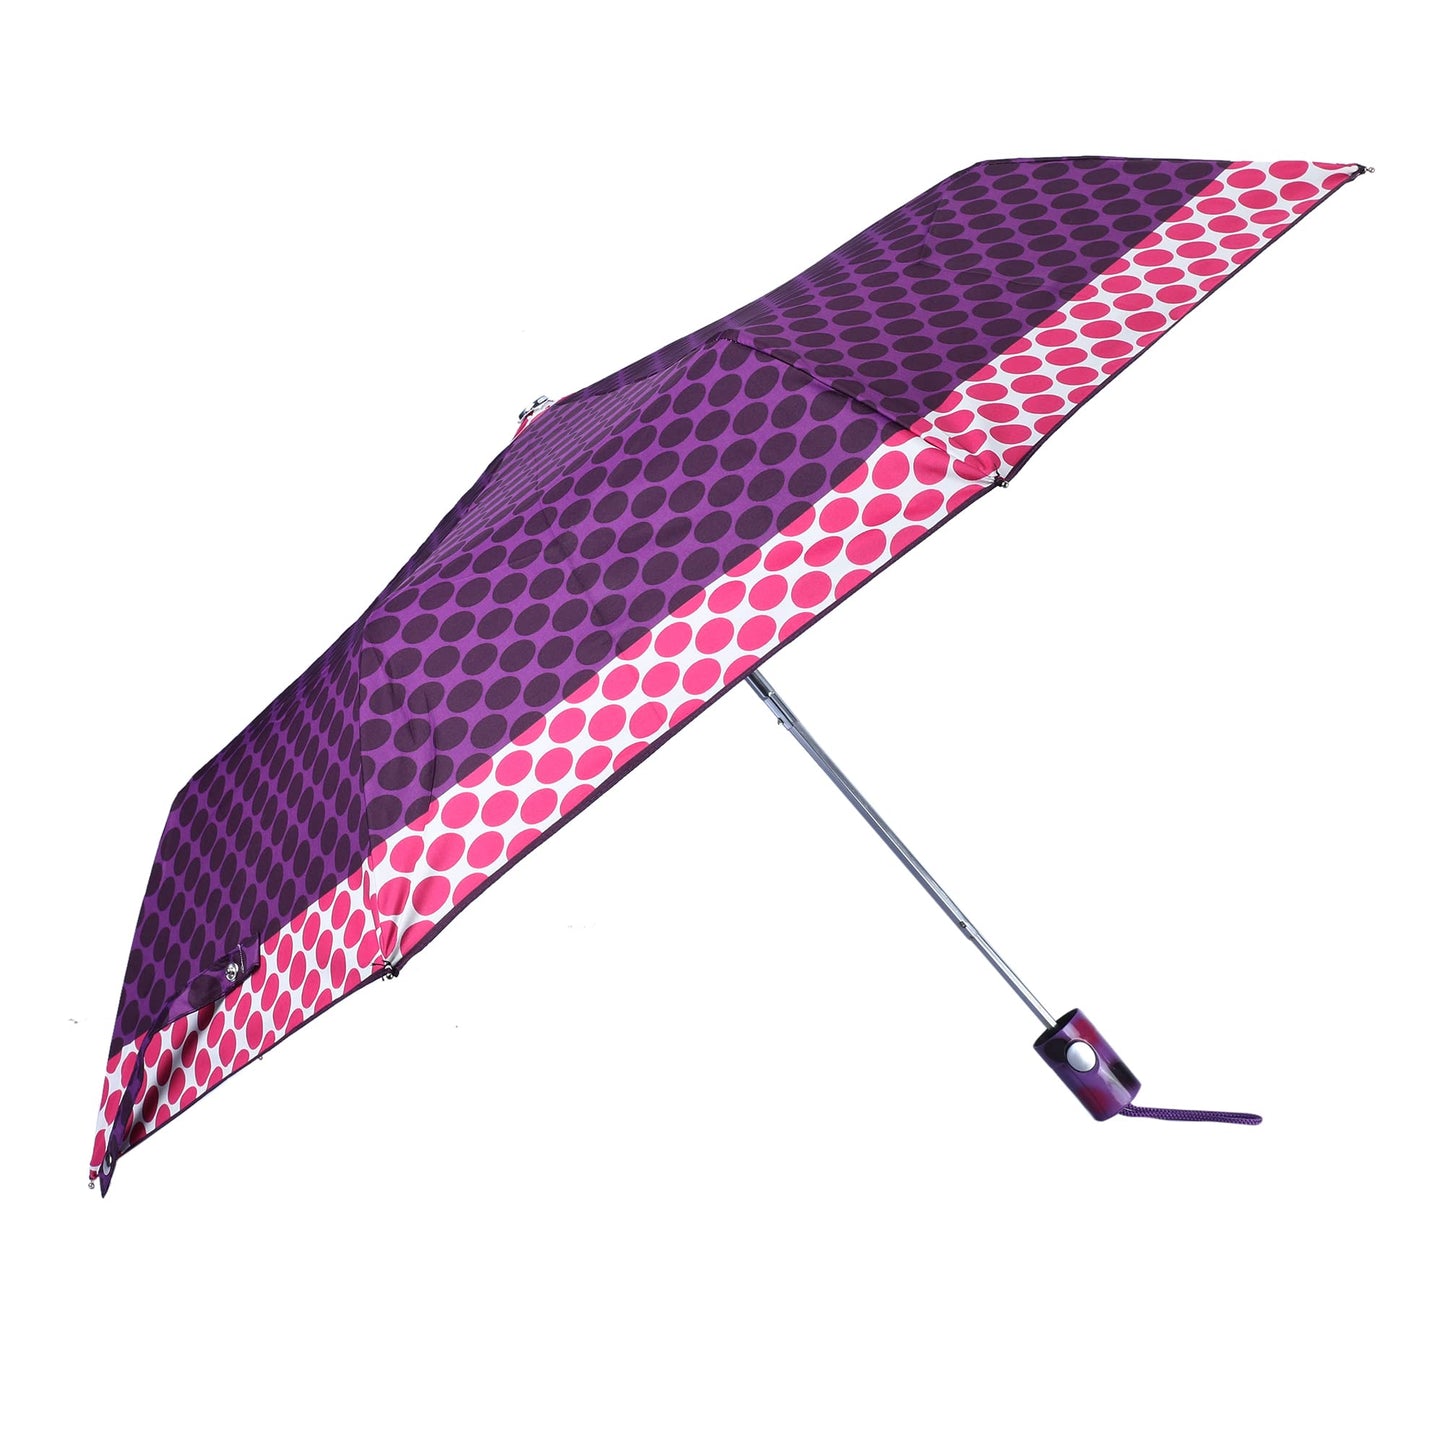 THE CLOWNFISH Umbrella 3 Fold Auto Open Waterproof Pongee Double Coated Silver Lined Umbrellas For Men and Women (Printed Design- Dark Pink)